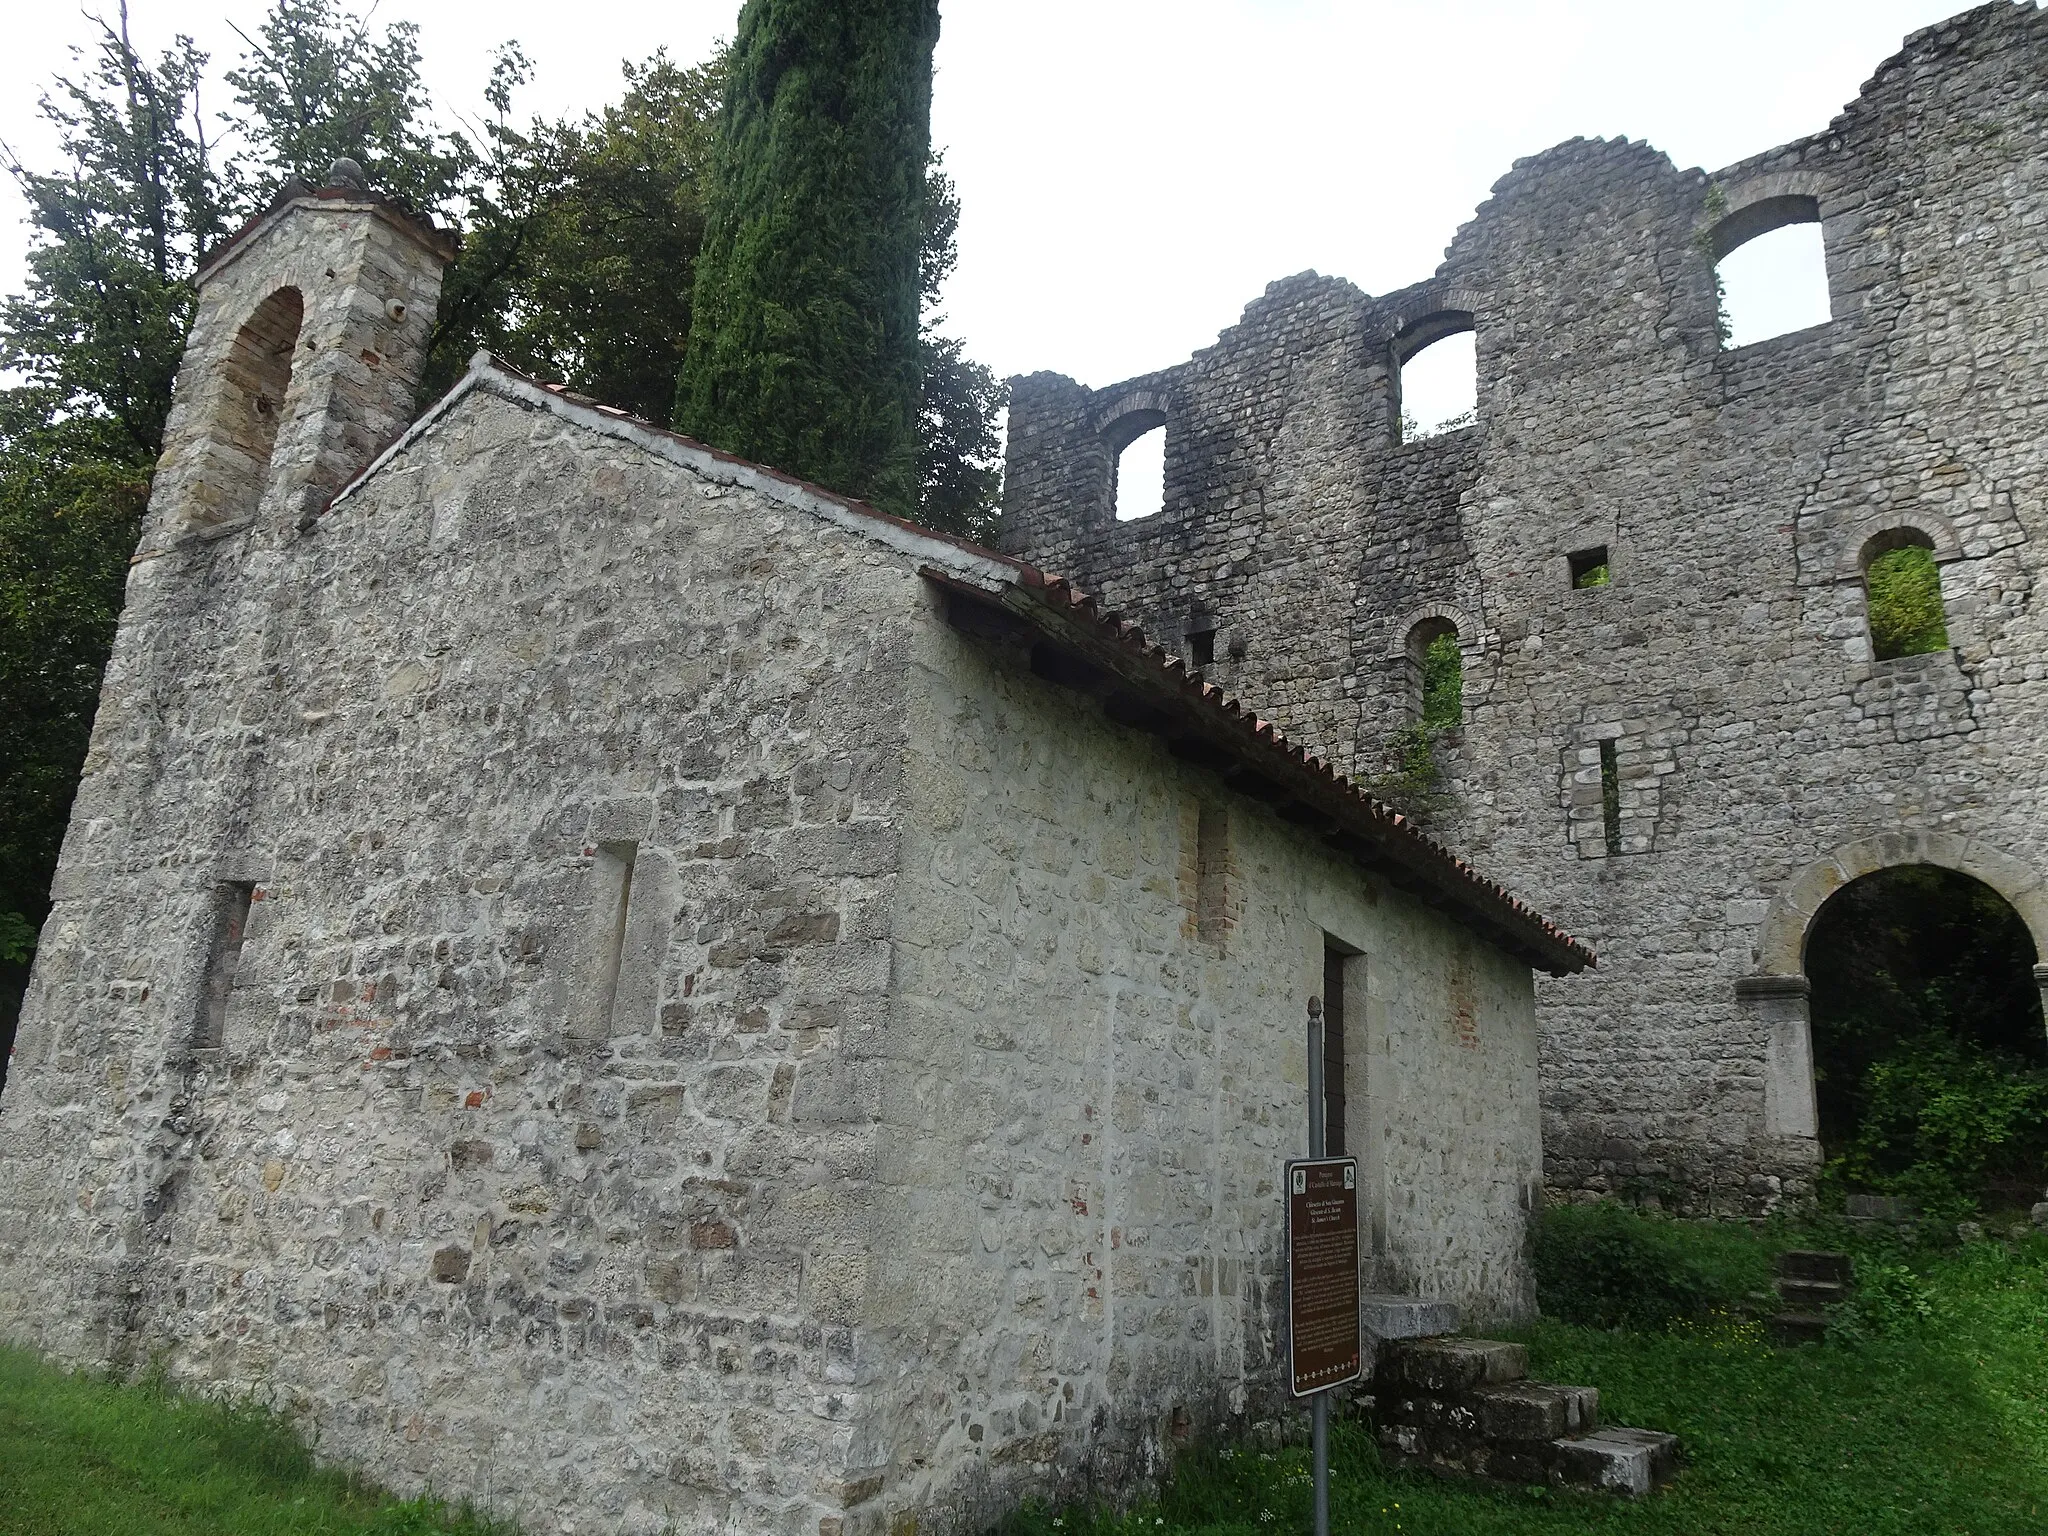 Photo showing: Attimis castle at Maniago, Italy